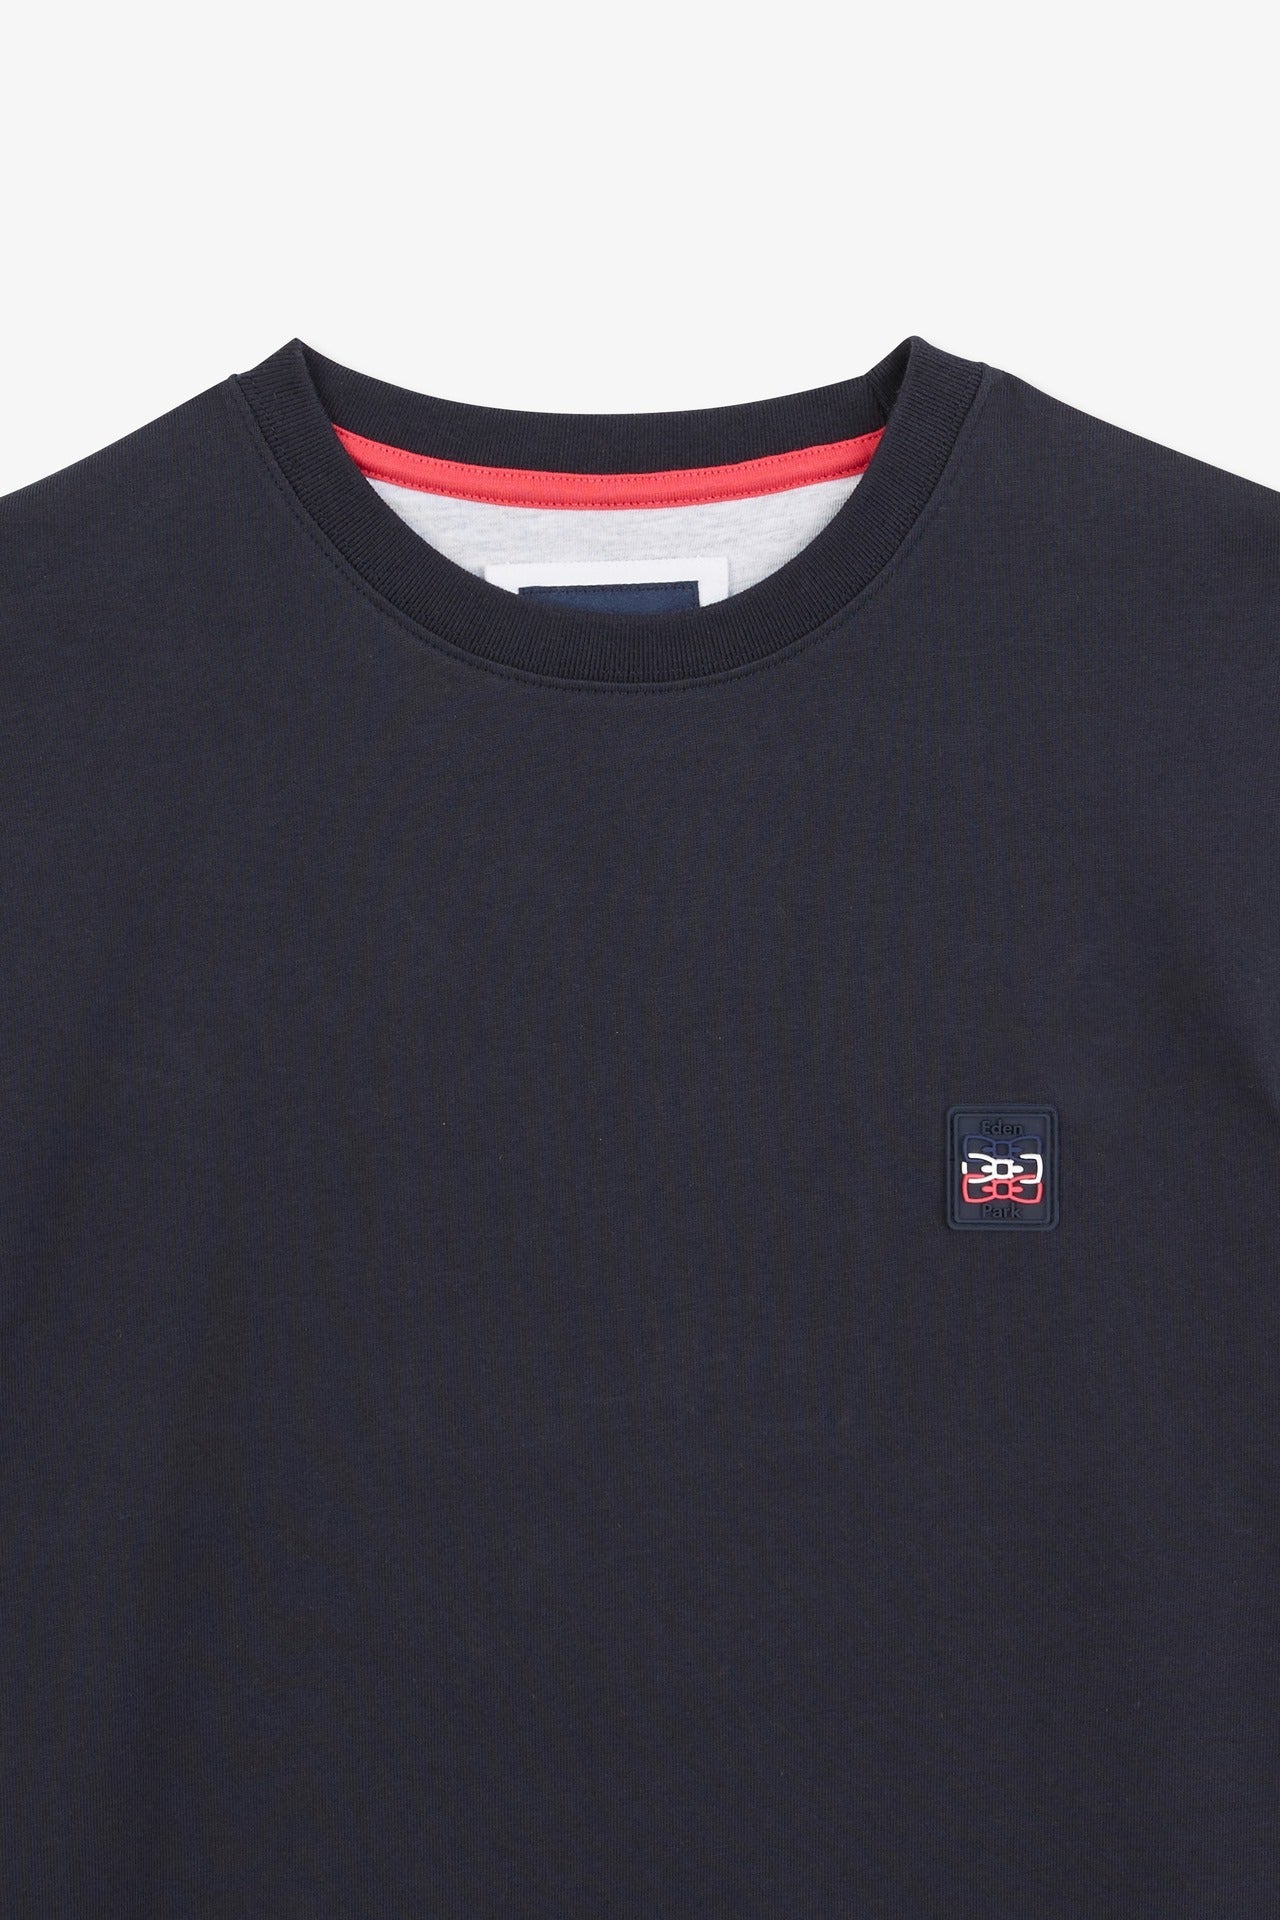 Navy blue short-sleeved T-shirt with embossed logo - Image 7